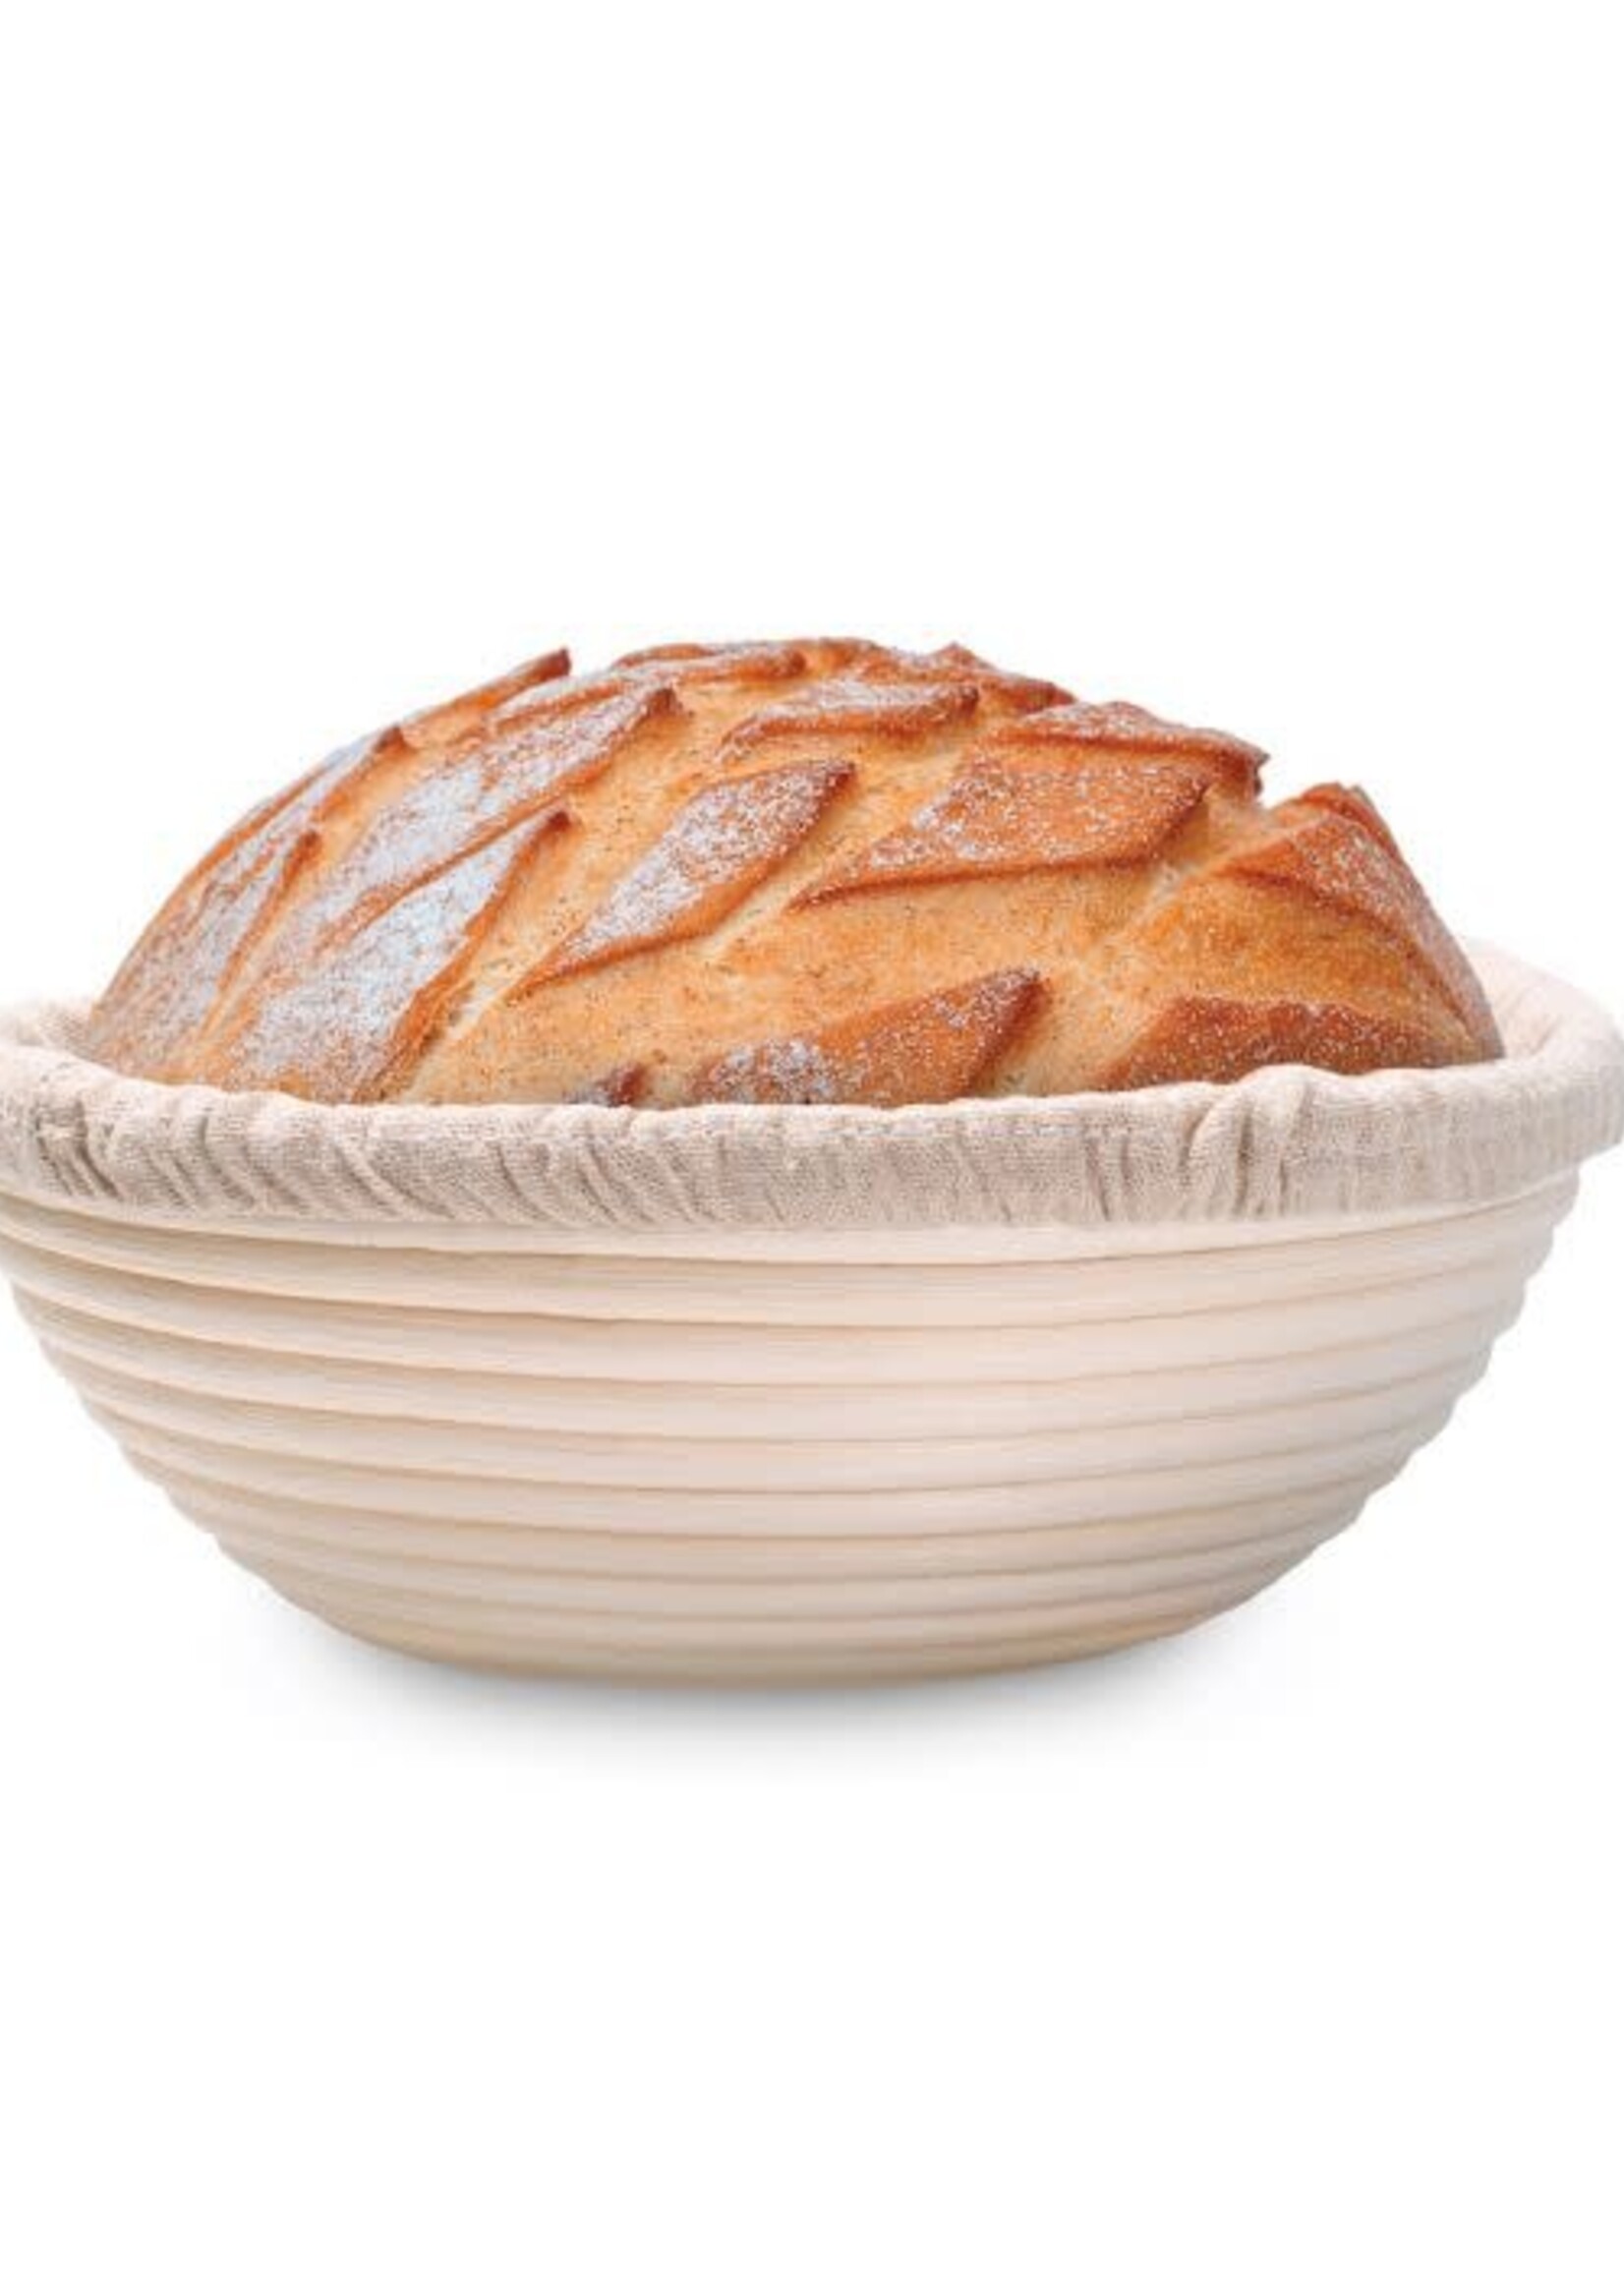 Harold Import Company Inc. Round Bread Proofing Basket